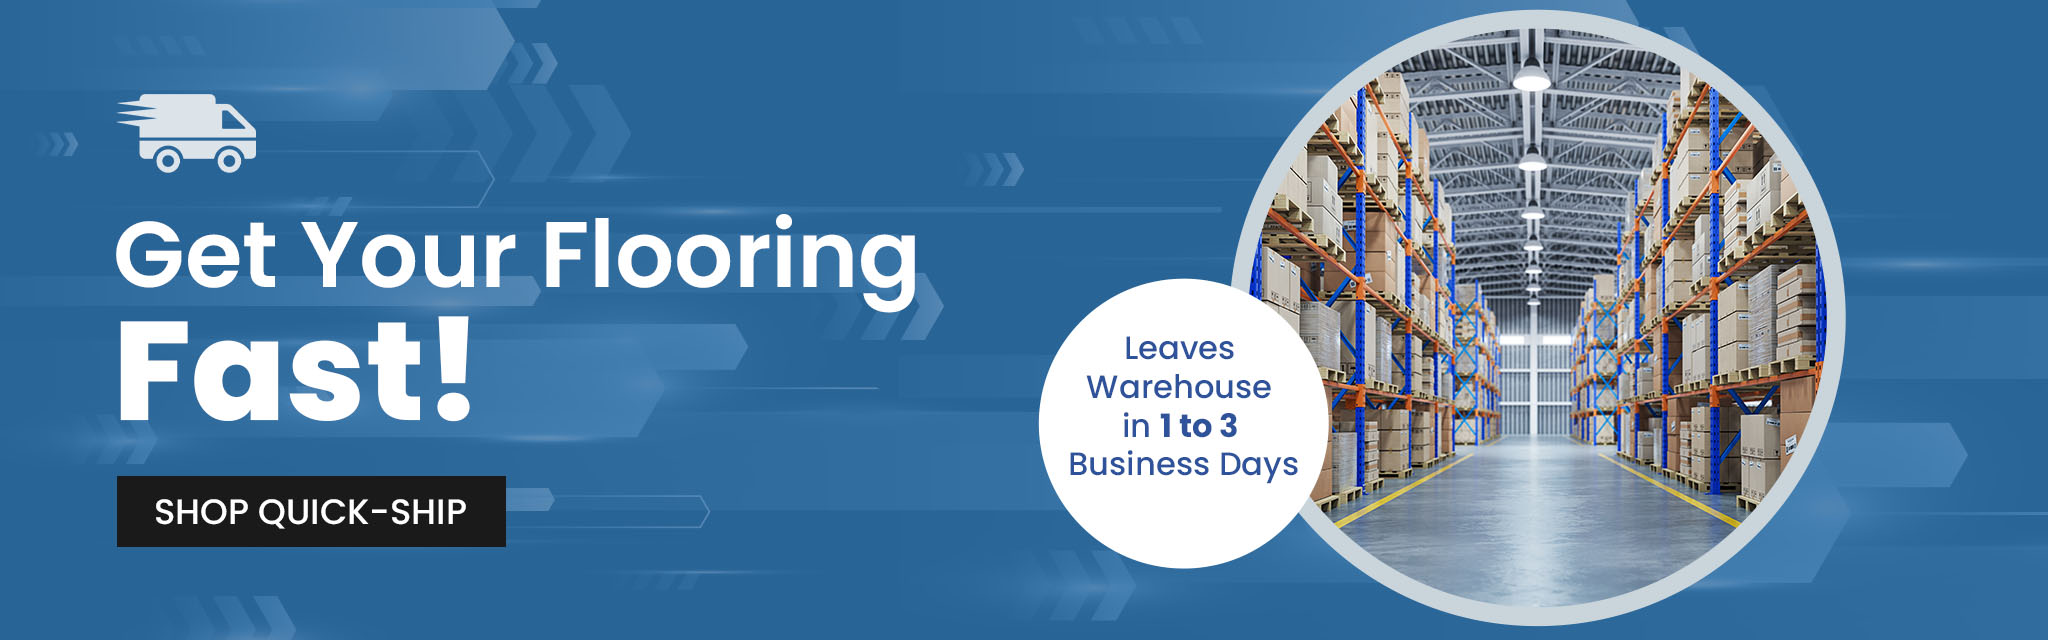 Get Your Flooring Fast! Leaves Warehouse in 1 to 3 Business Days. Shop Quick-Ship